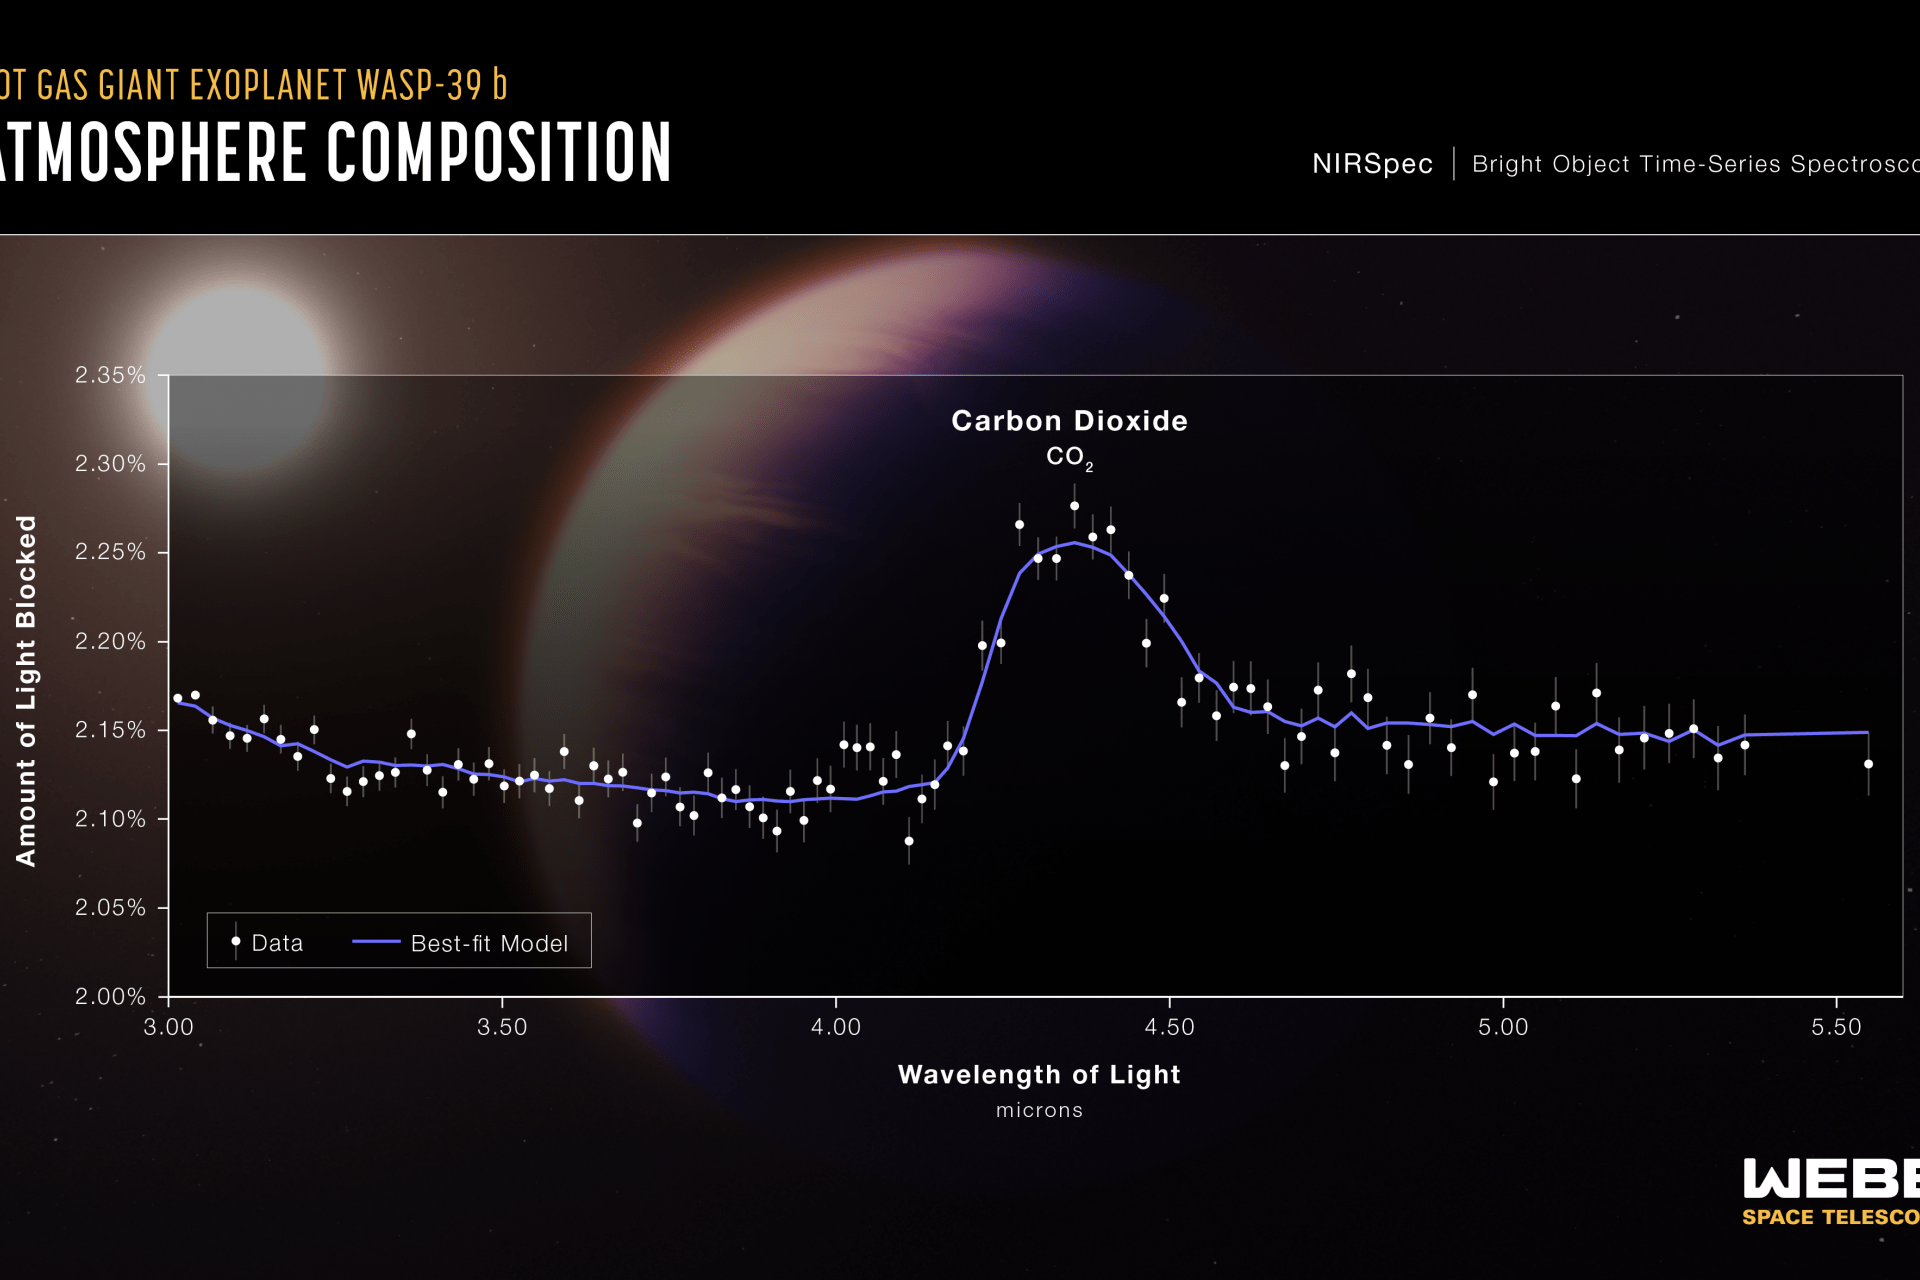 Graph of the transmission spectrum from James Webb of WASP-39b&#039;s atmosphere, showing prominently the peak for carbon dioxide